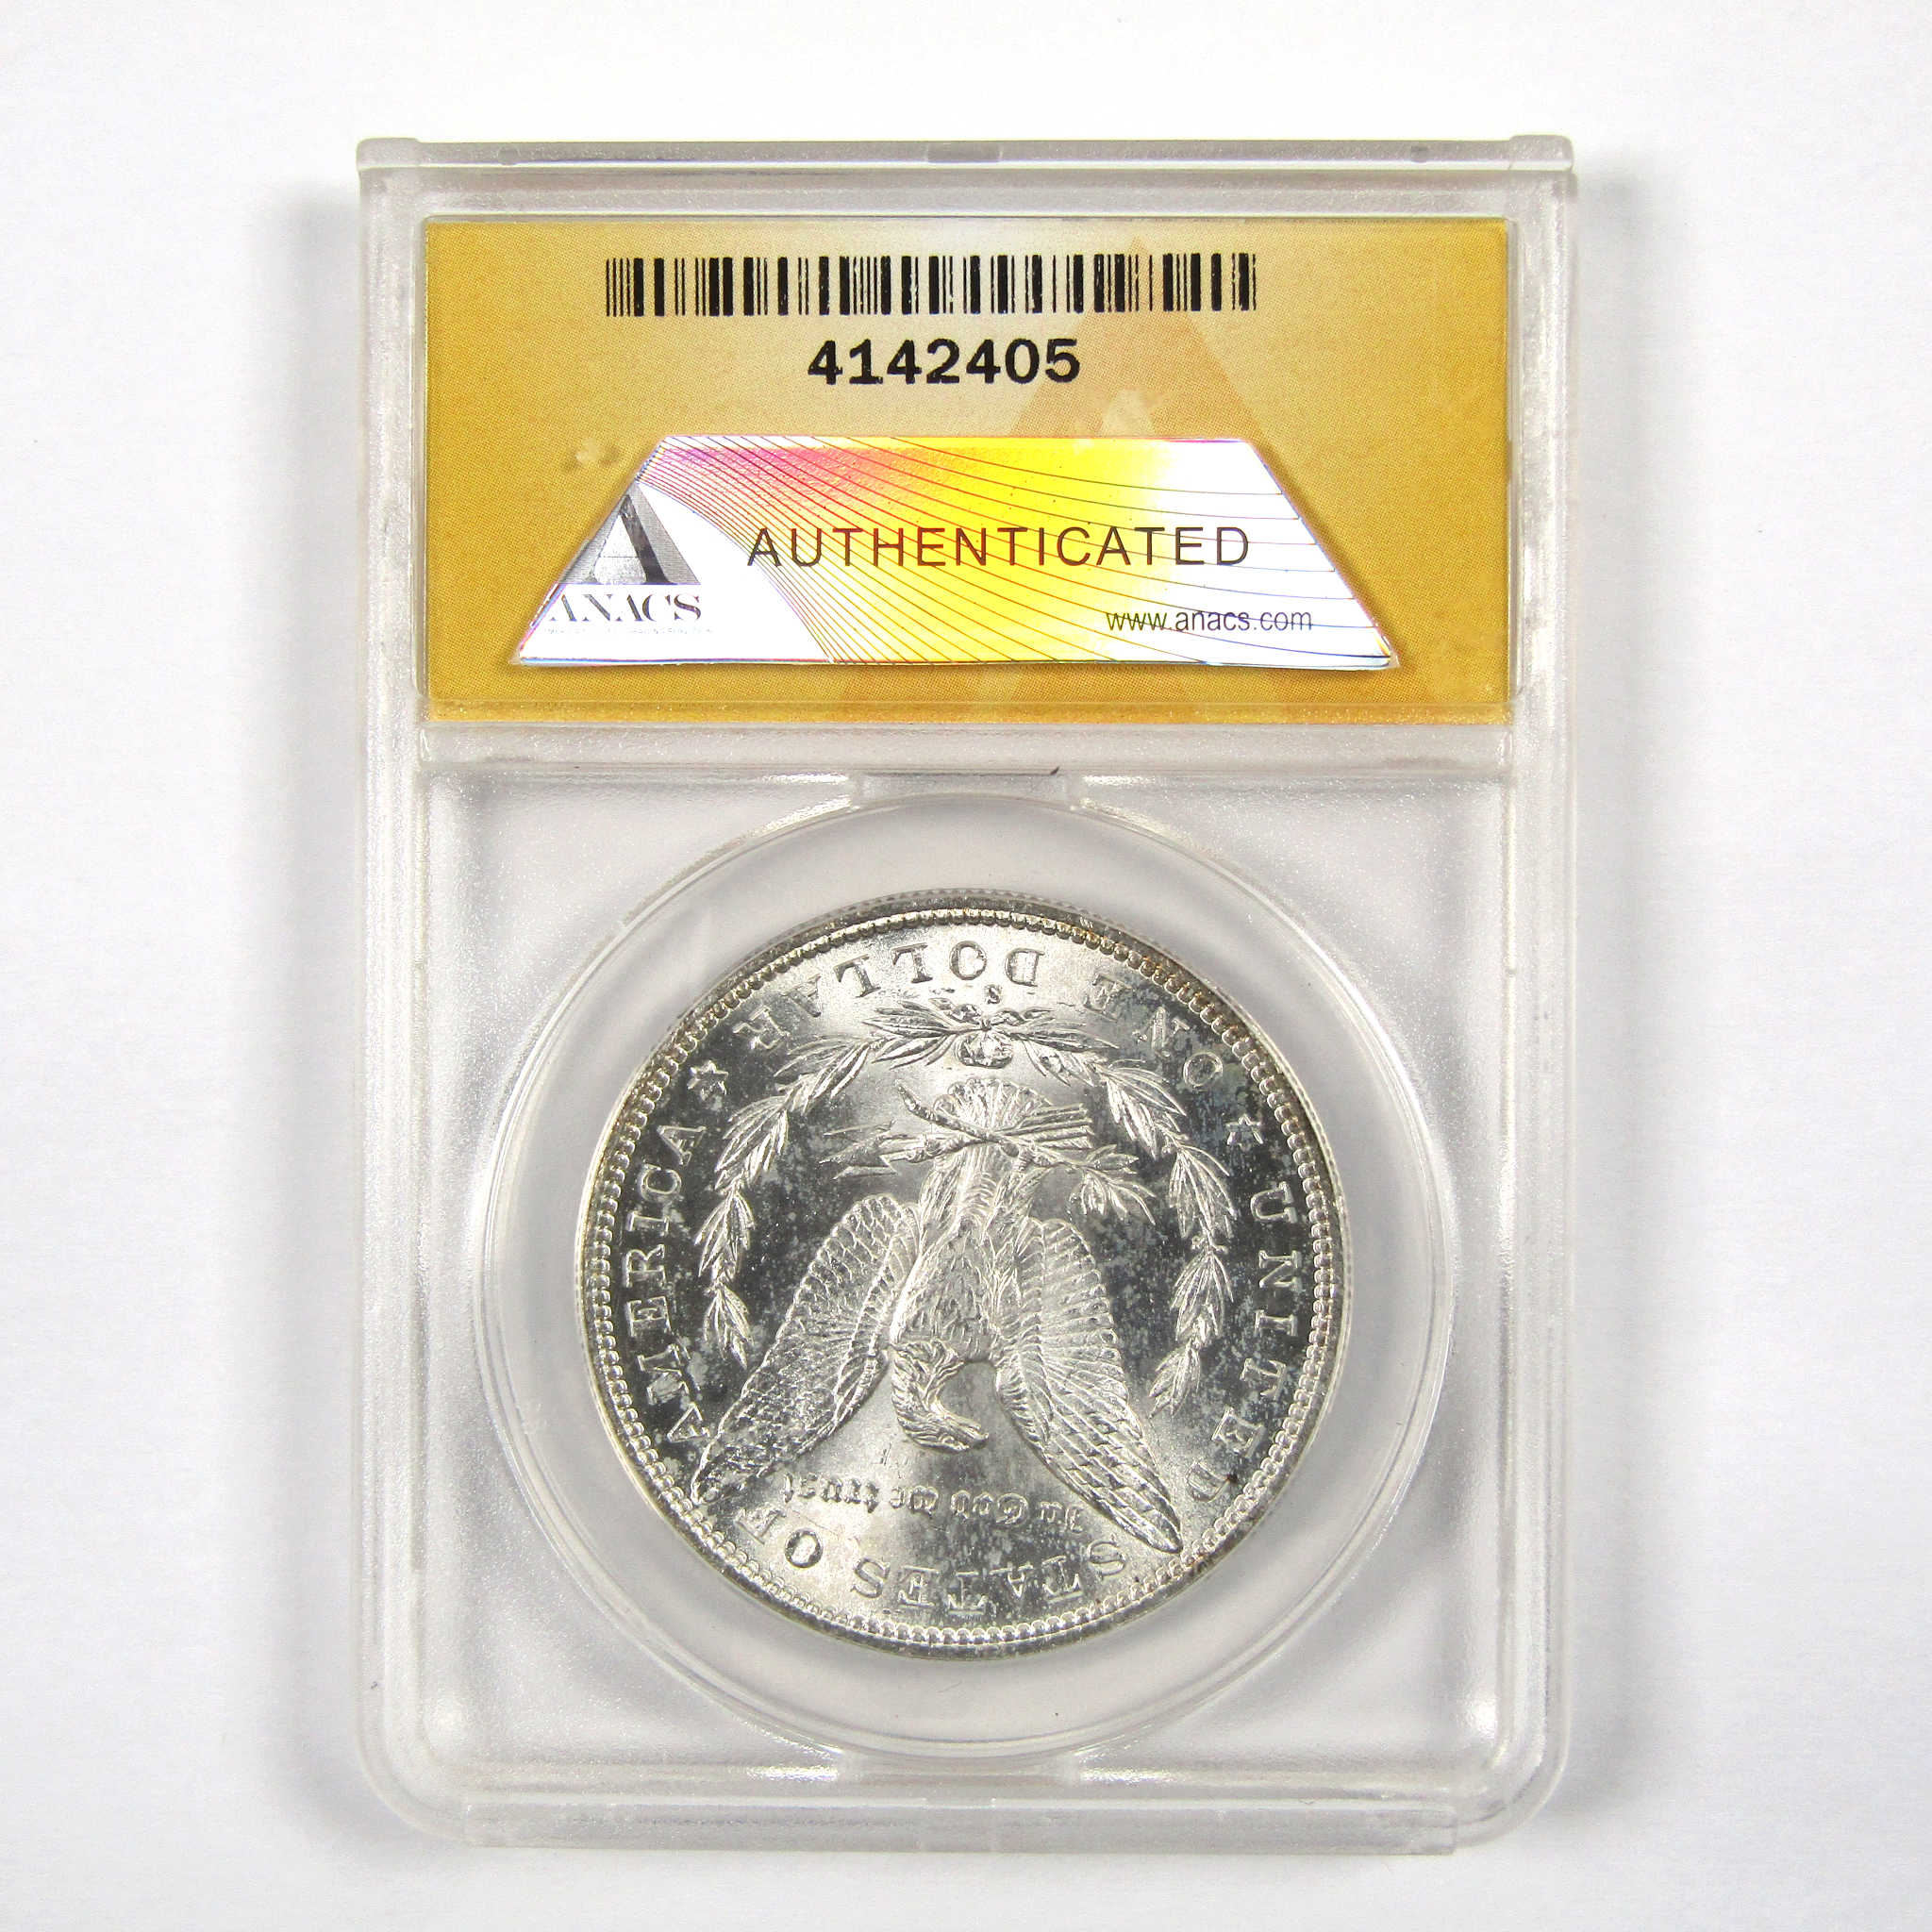 1887 S Morgan Dollar MS 63 ANACS 90% Silver $1 Uncirculated SKU:I9181 - Morgan coin - Morgan silver dollar - Morgan silver dollar for sale - Profile Coins &amp; Collectibles